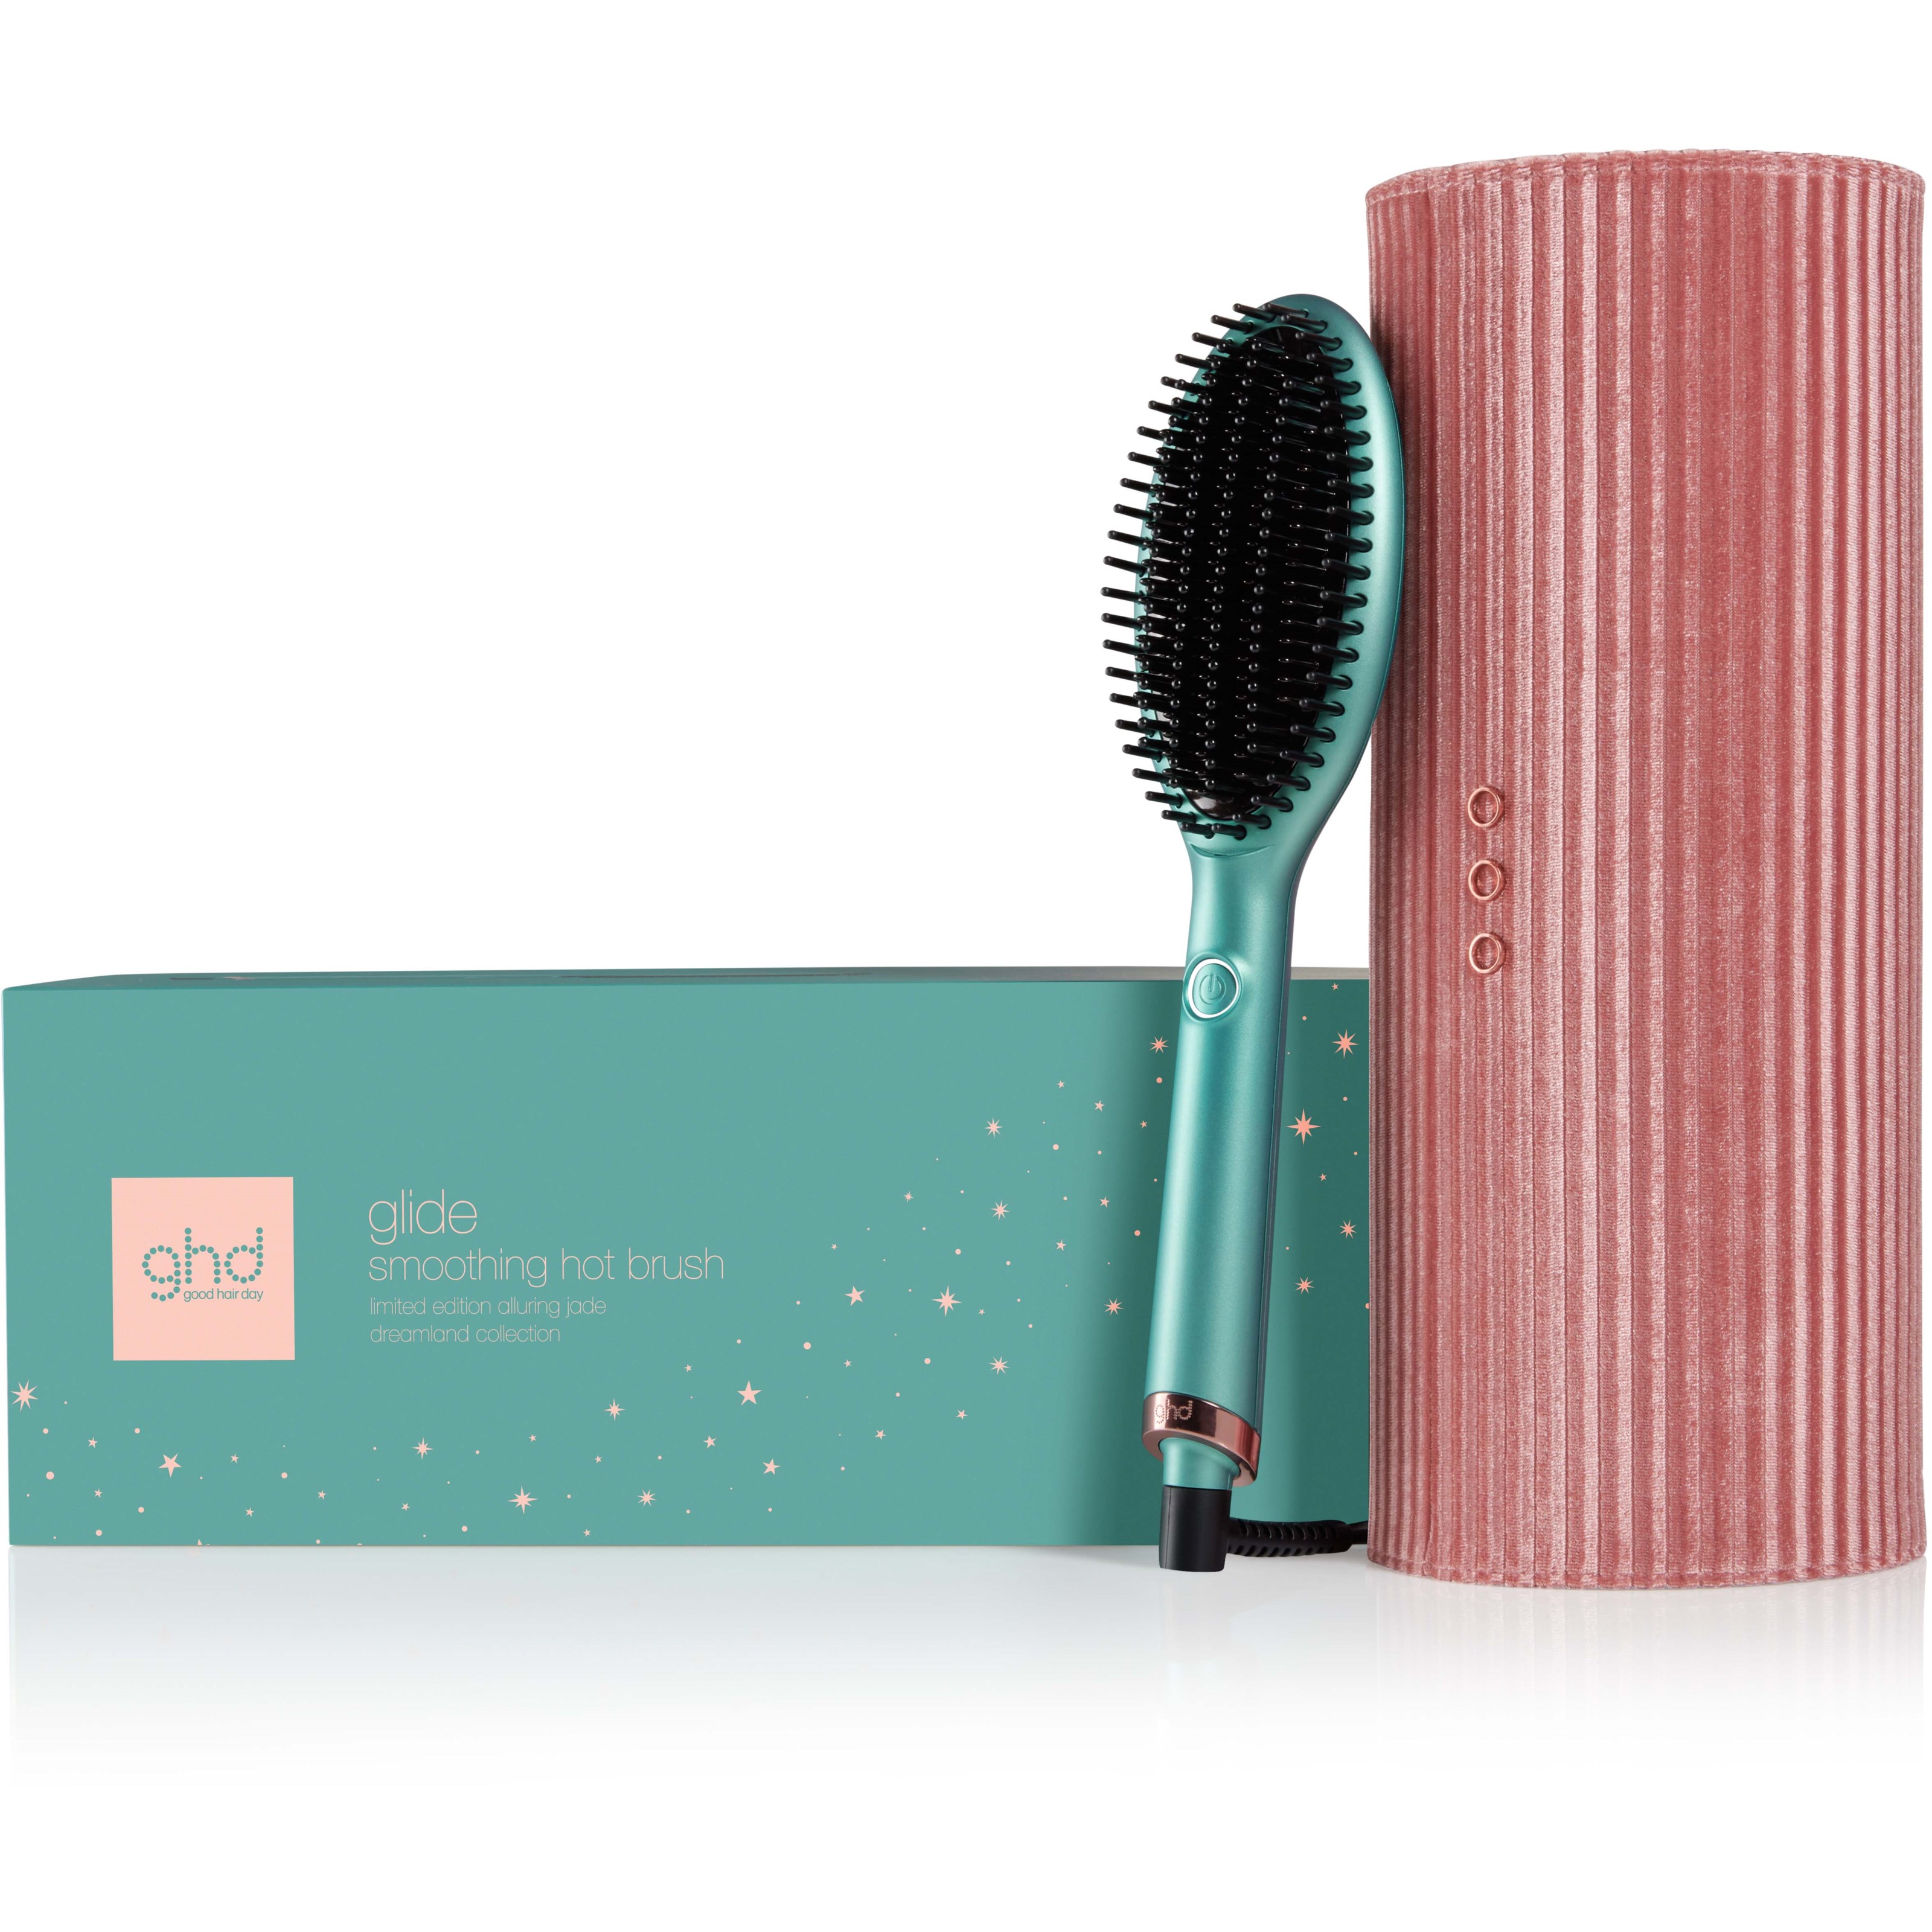 Läs mer om ghd Glide Dreamland Holiday Collection Limited Edition Gift Set